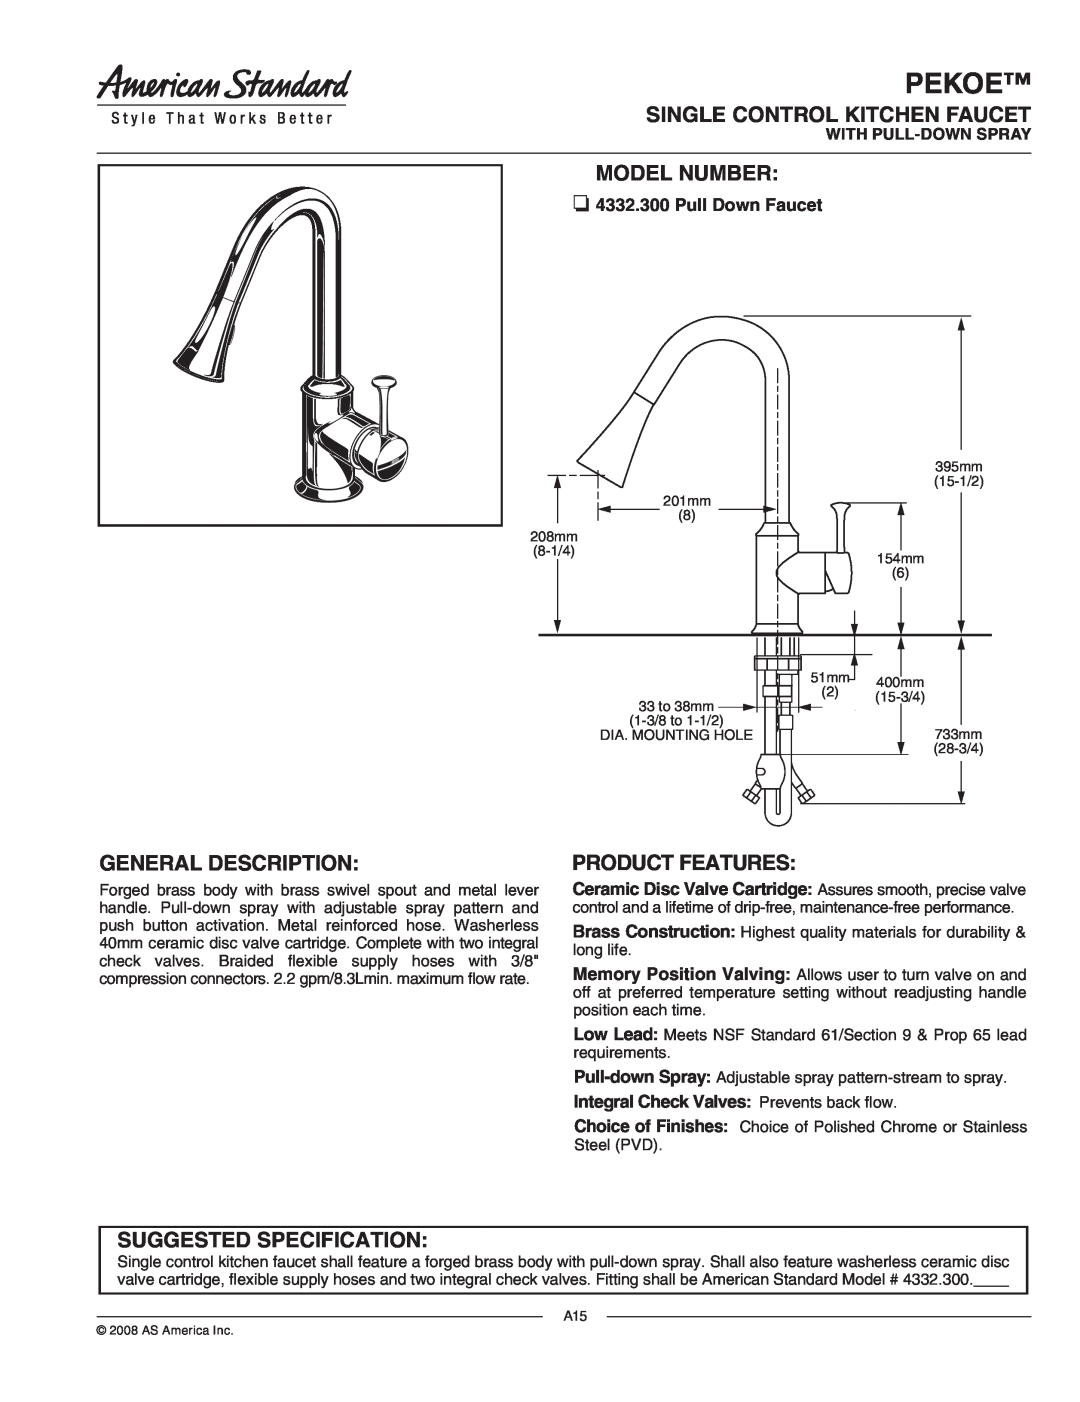 American Standard 4332.300 specifications Pekoe, Product Features, Pull Down Faucet, With Pull-Downspray, Model Number 